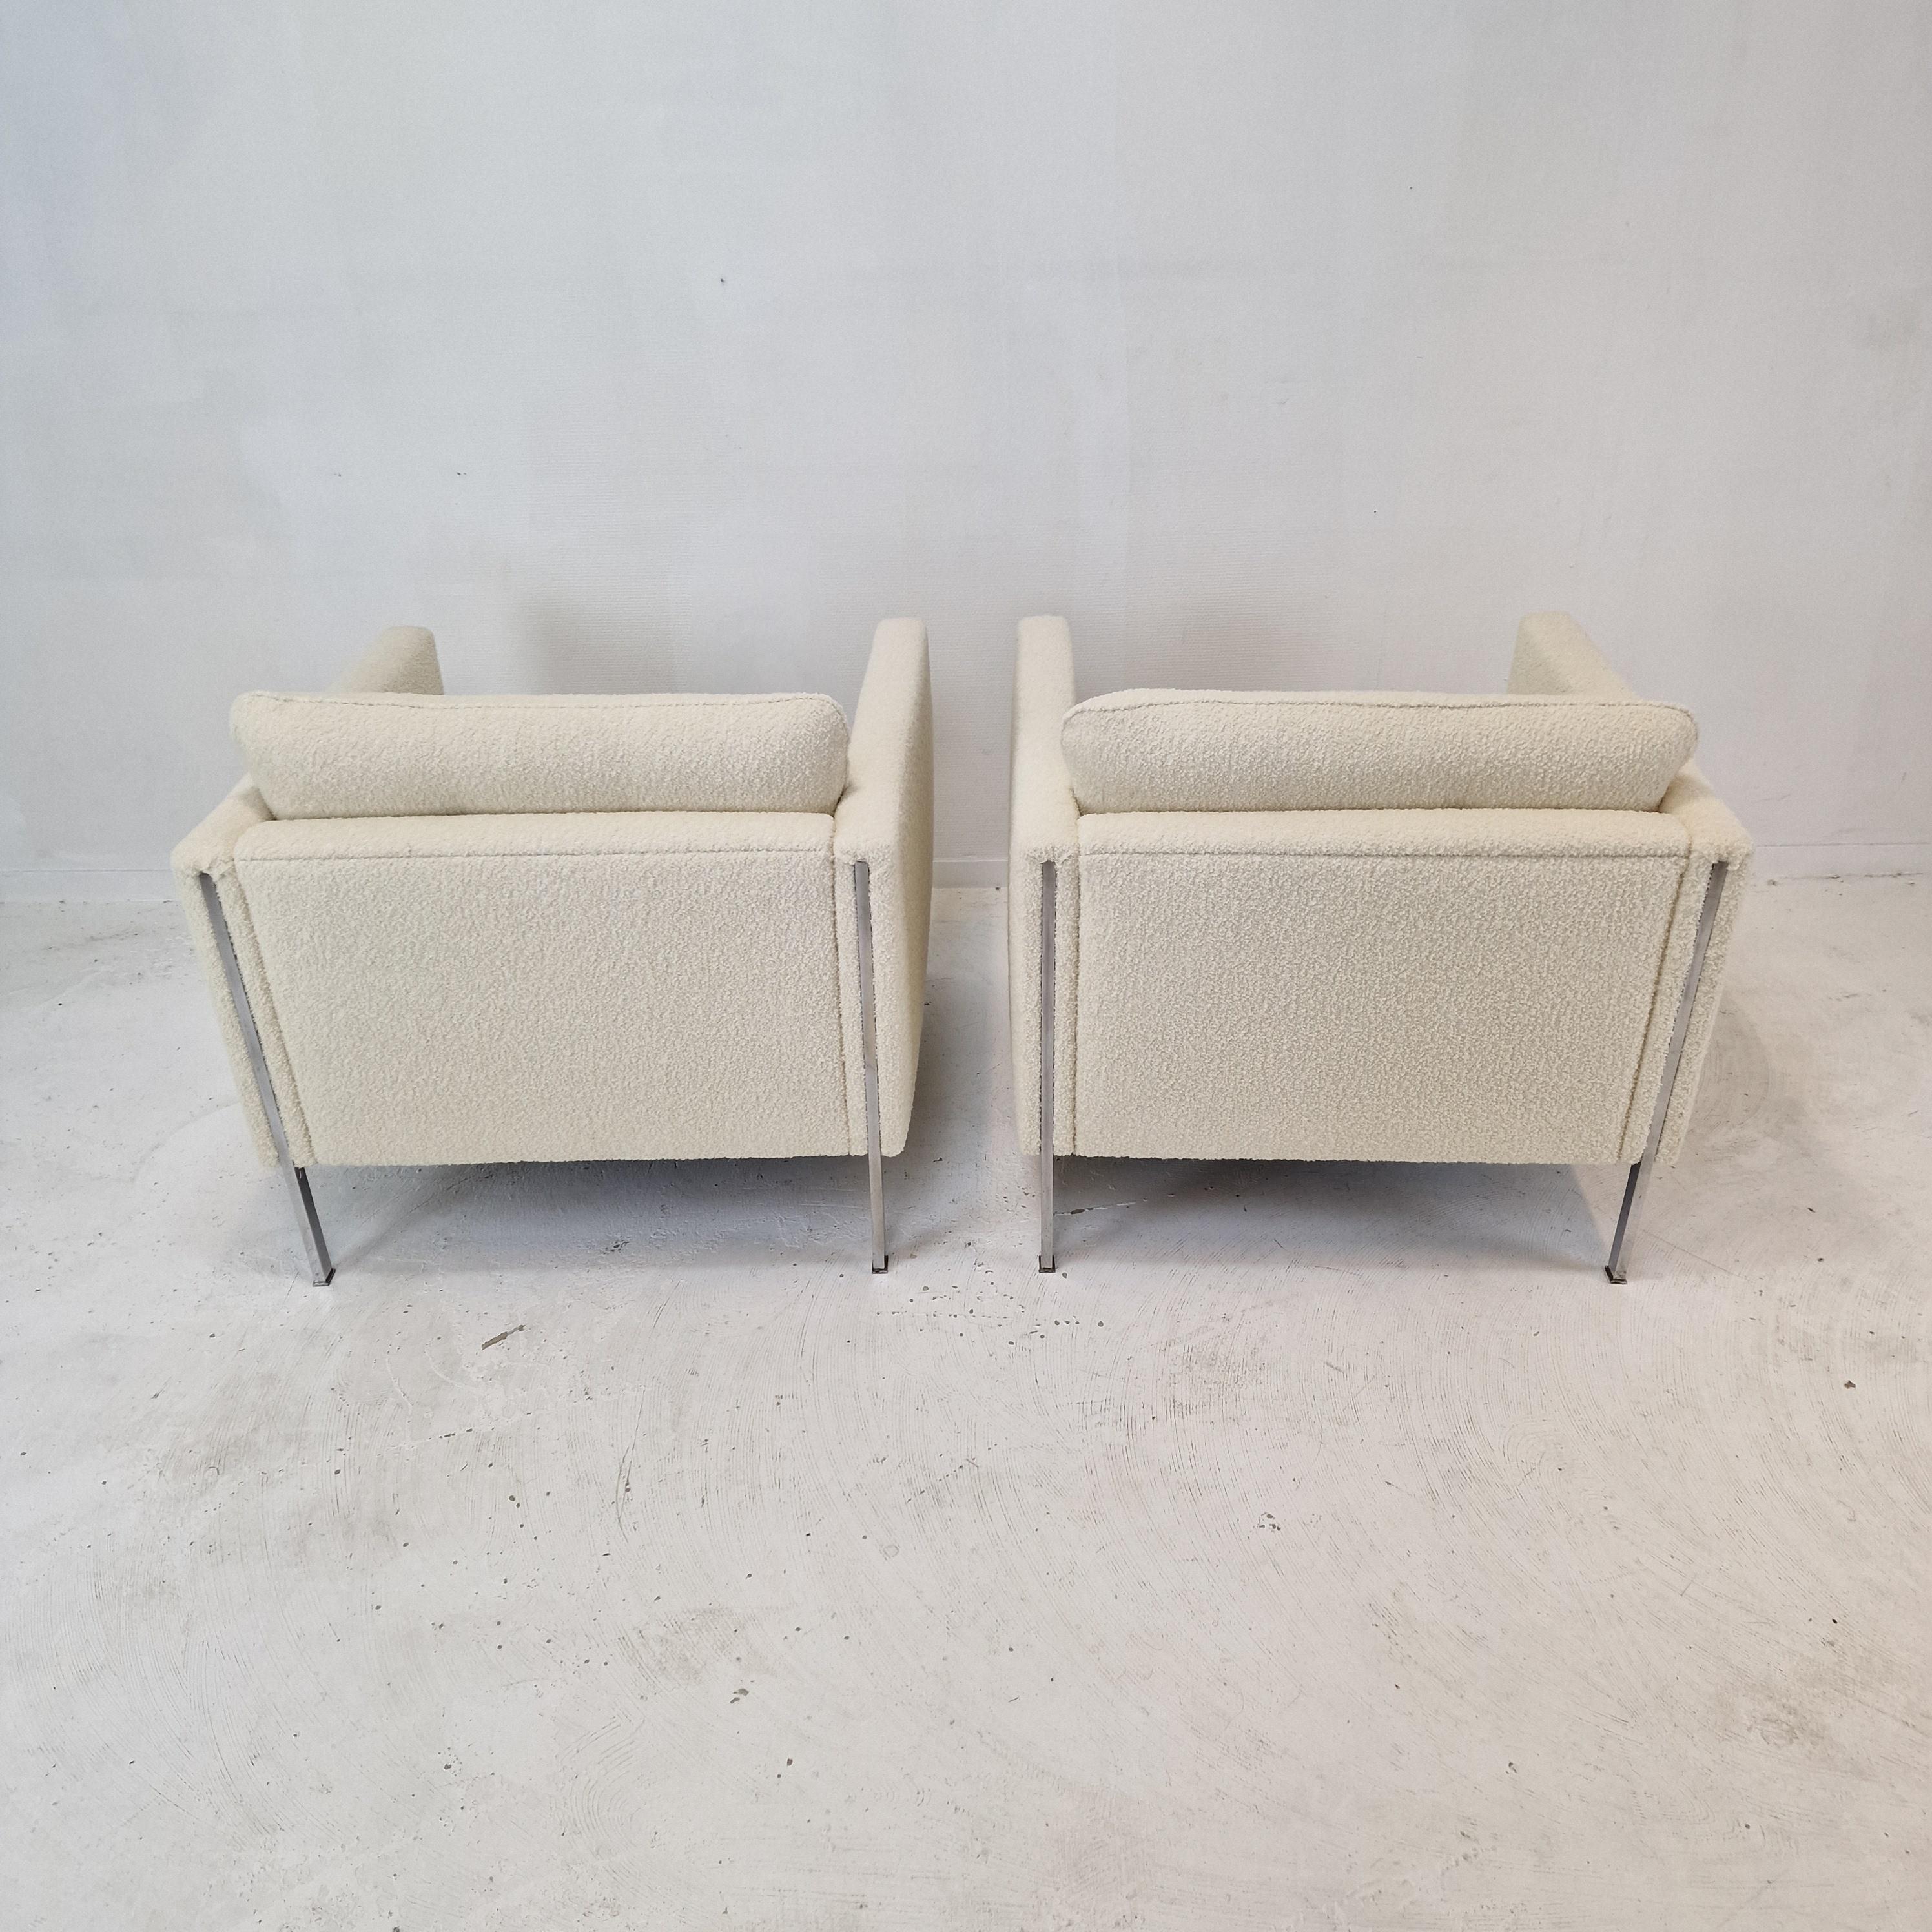 Midcentury Set of 2 Model 442 Chairs by Pierre Paulin for Artifort, 1960s For Sale 7